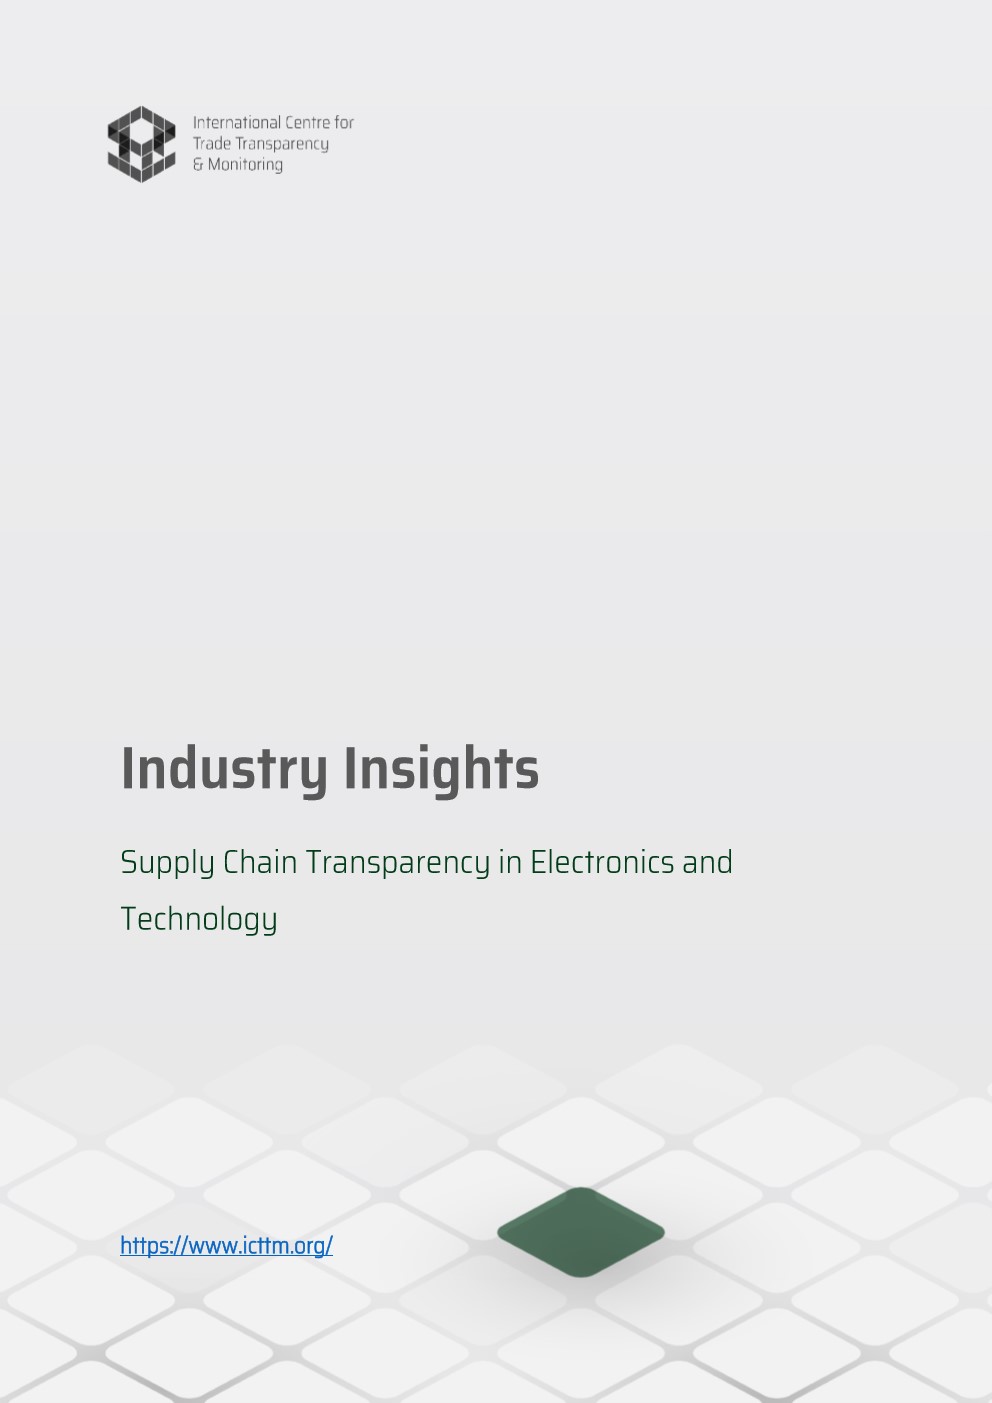 Supply Chain Transparency in Electronics and Technology